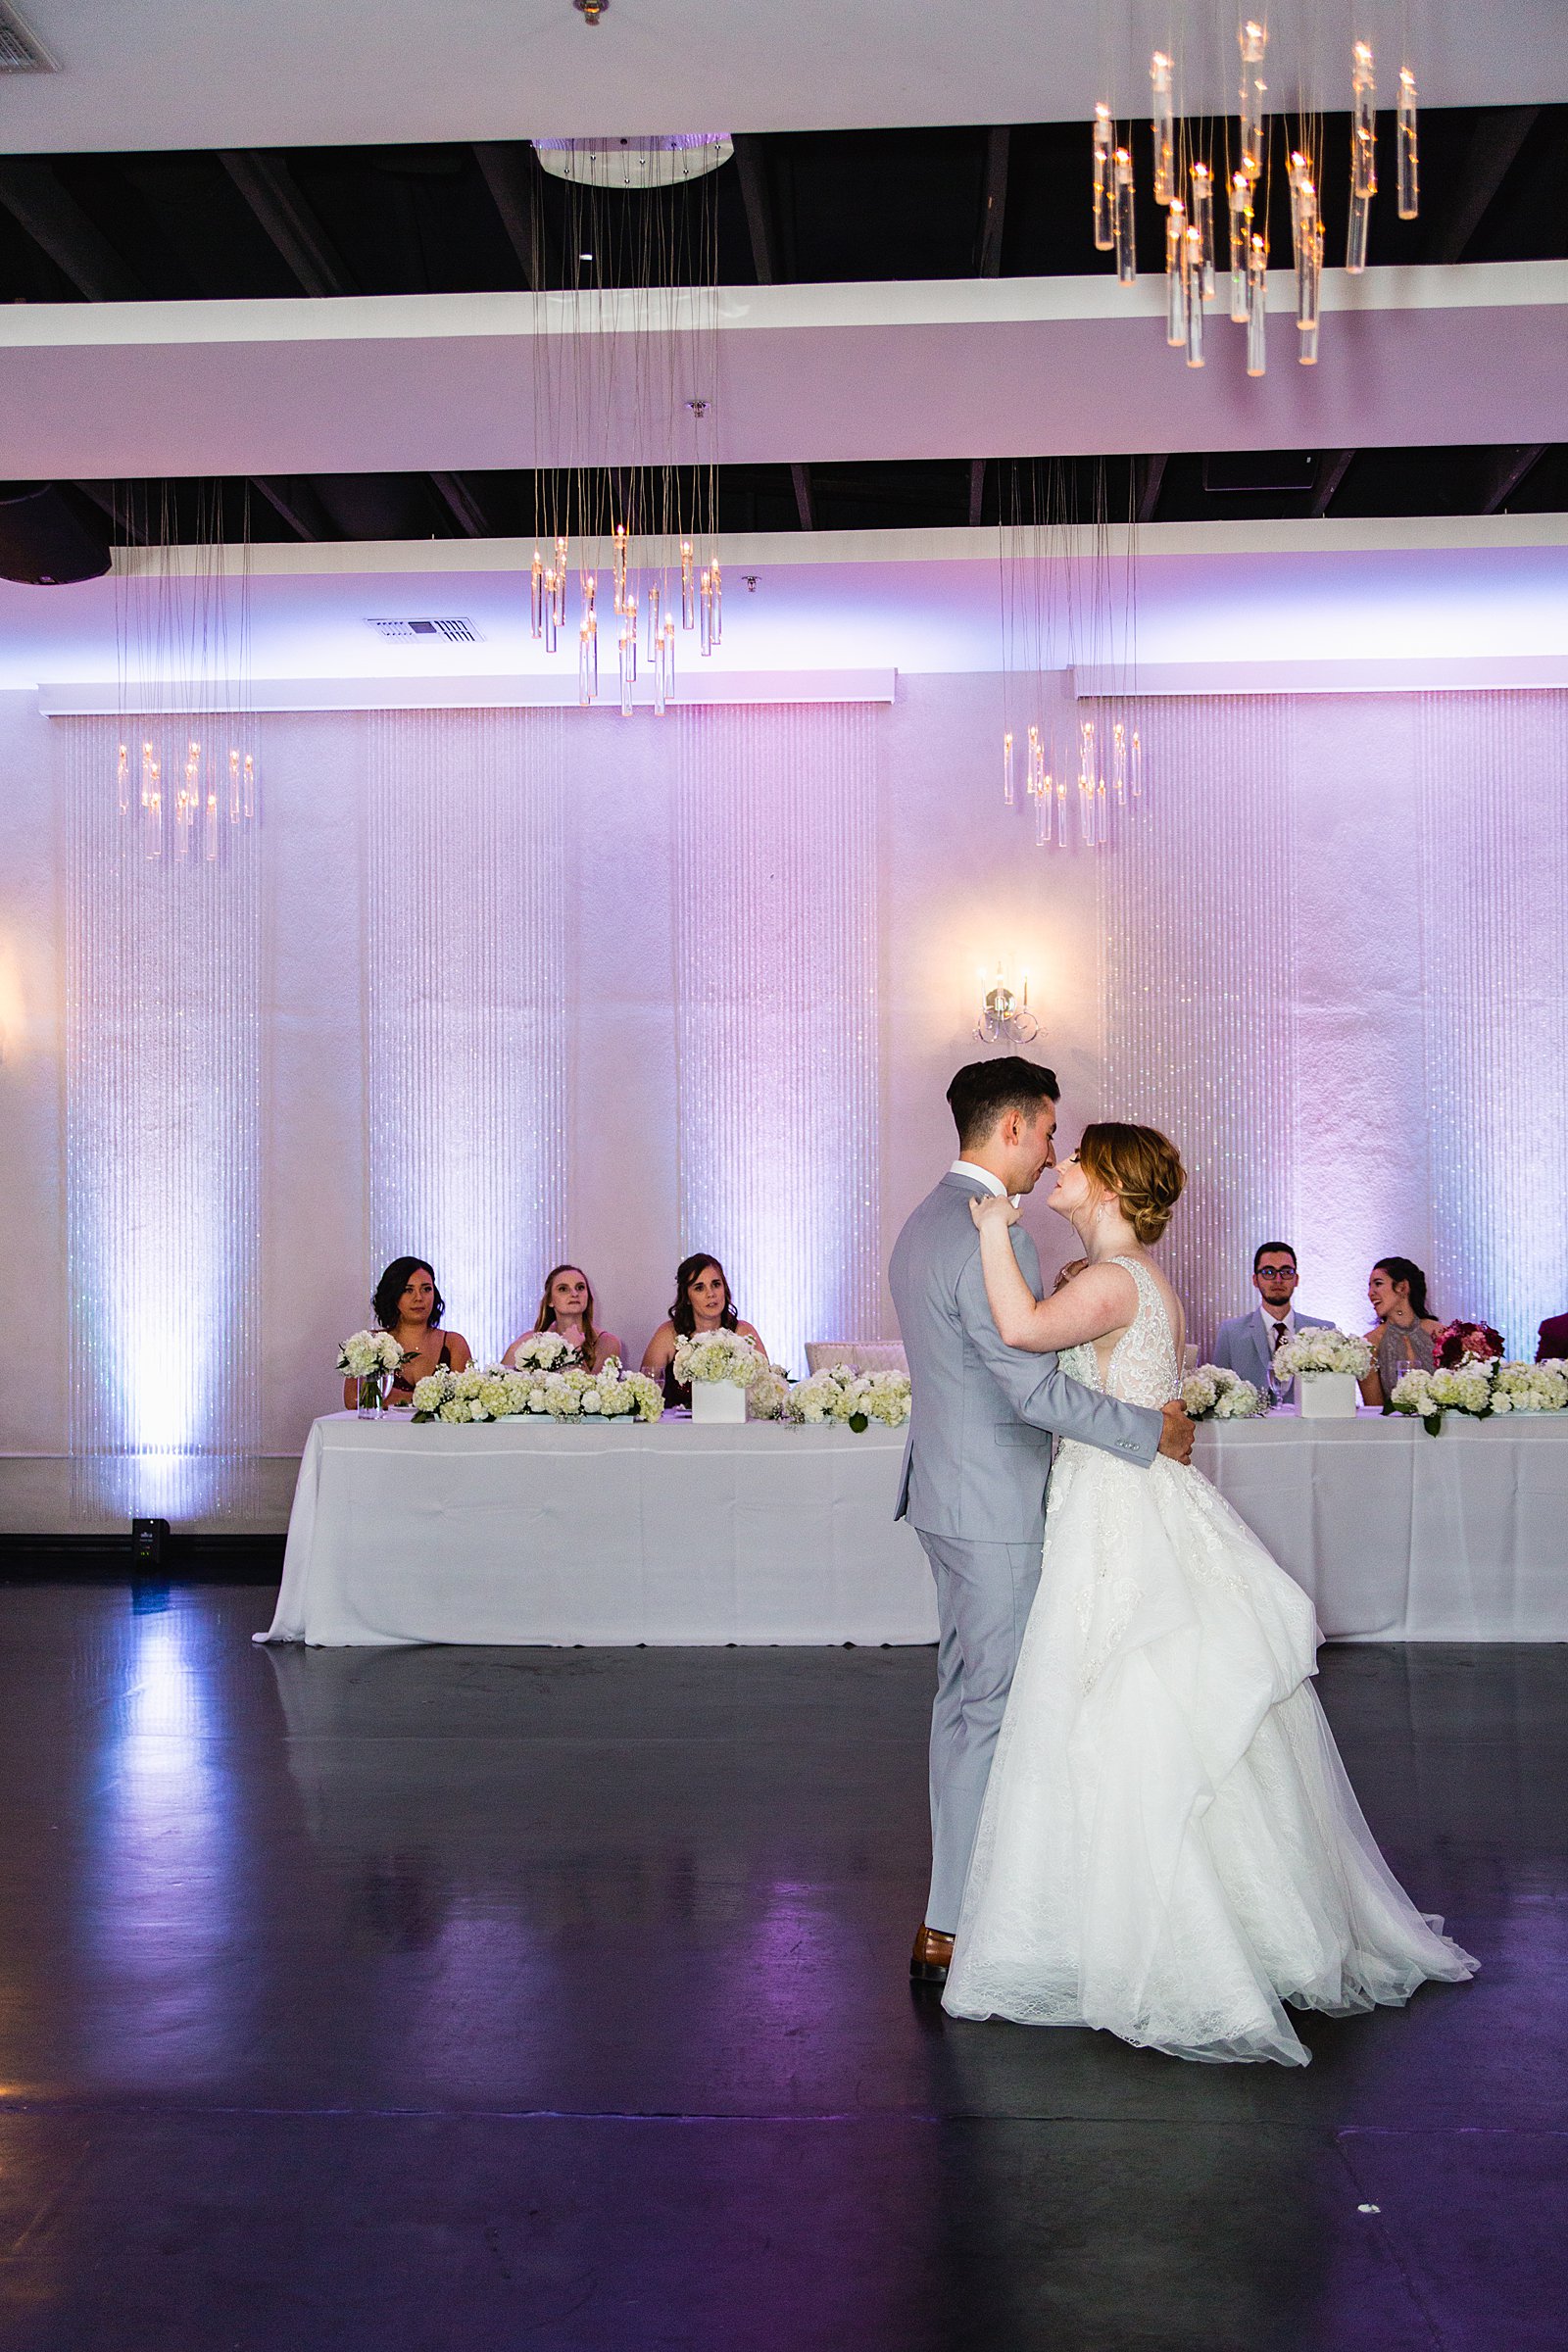 Bride and Groom sharing first dance at their SoHo63 wedding reception by Arizona wedding photographer PMA Photography.